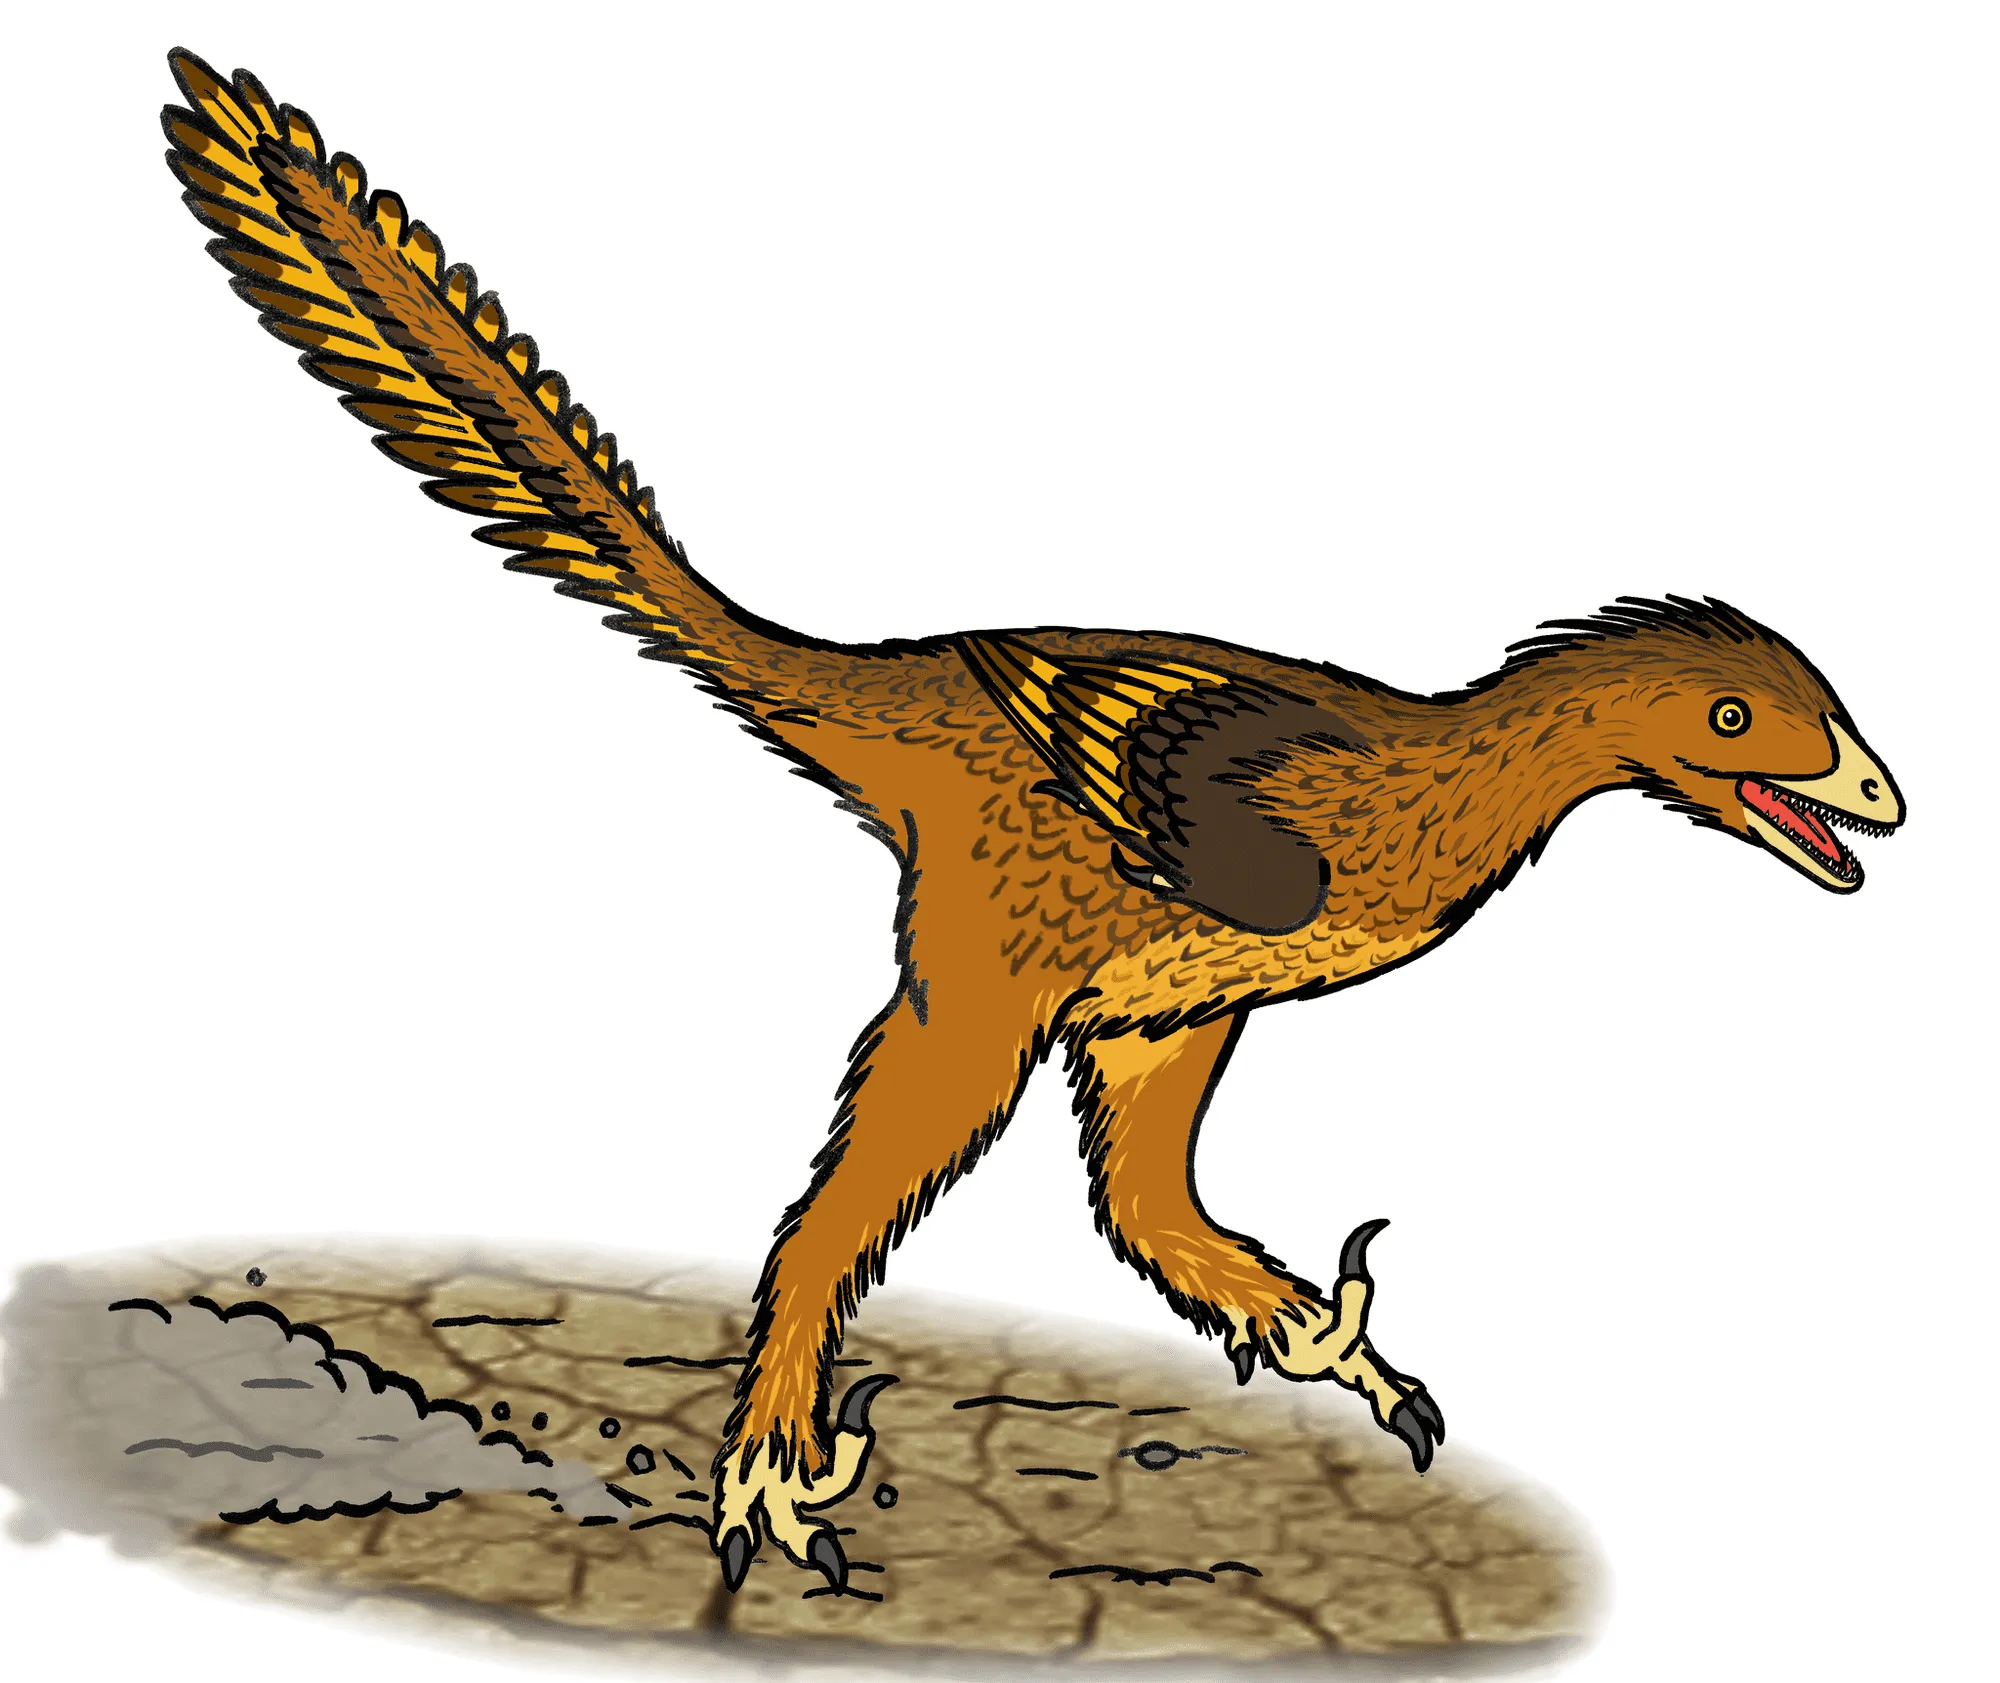 Geminiraptor belonged to the lower or Early Cretaceous period.